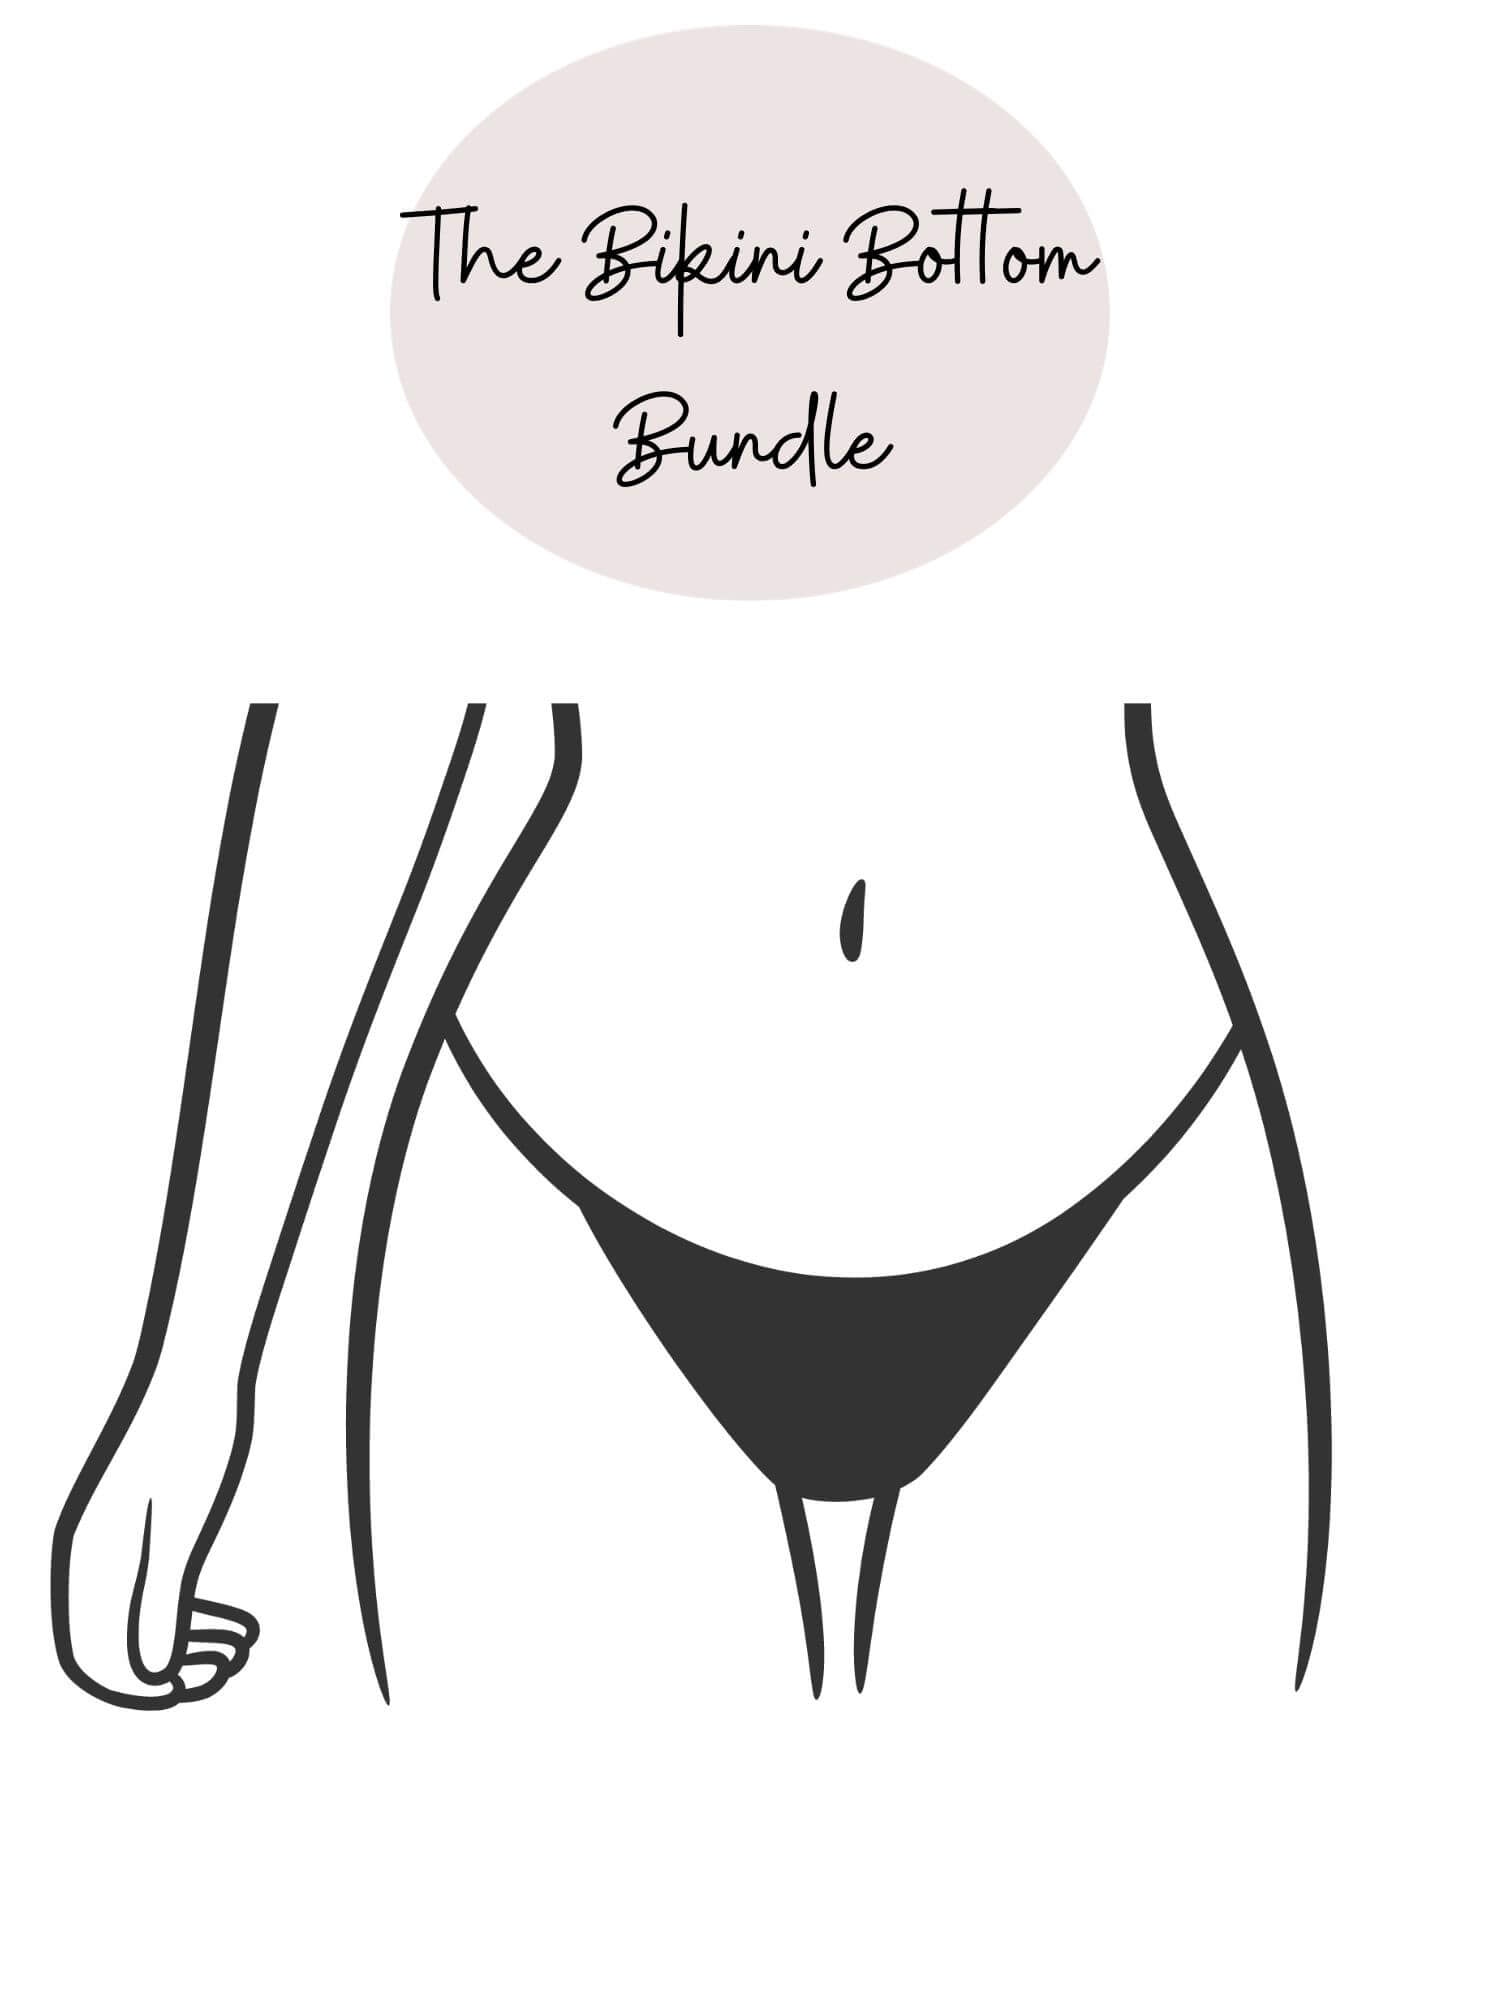 The best sale ever, three bikini bottoms for less than the cost of one!